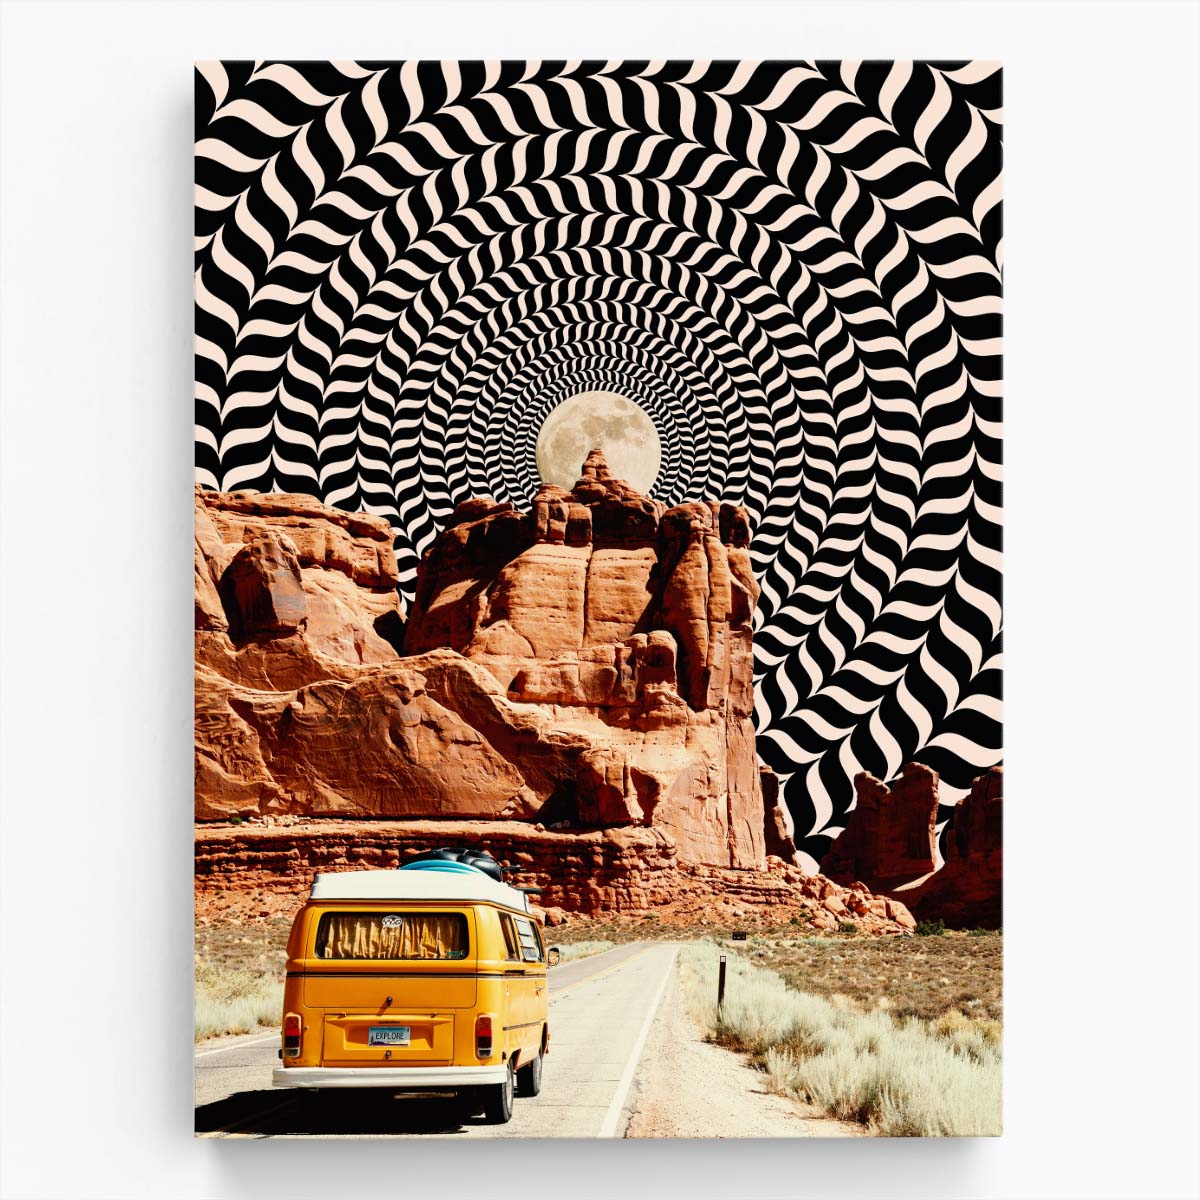 Vintage Surreal Moon Road Trip Collage Illustration Artwork by Luxuriance Designs, made in USA